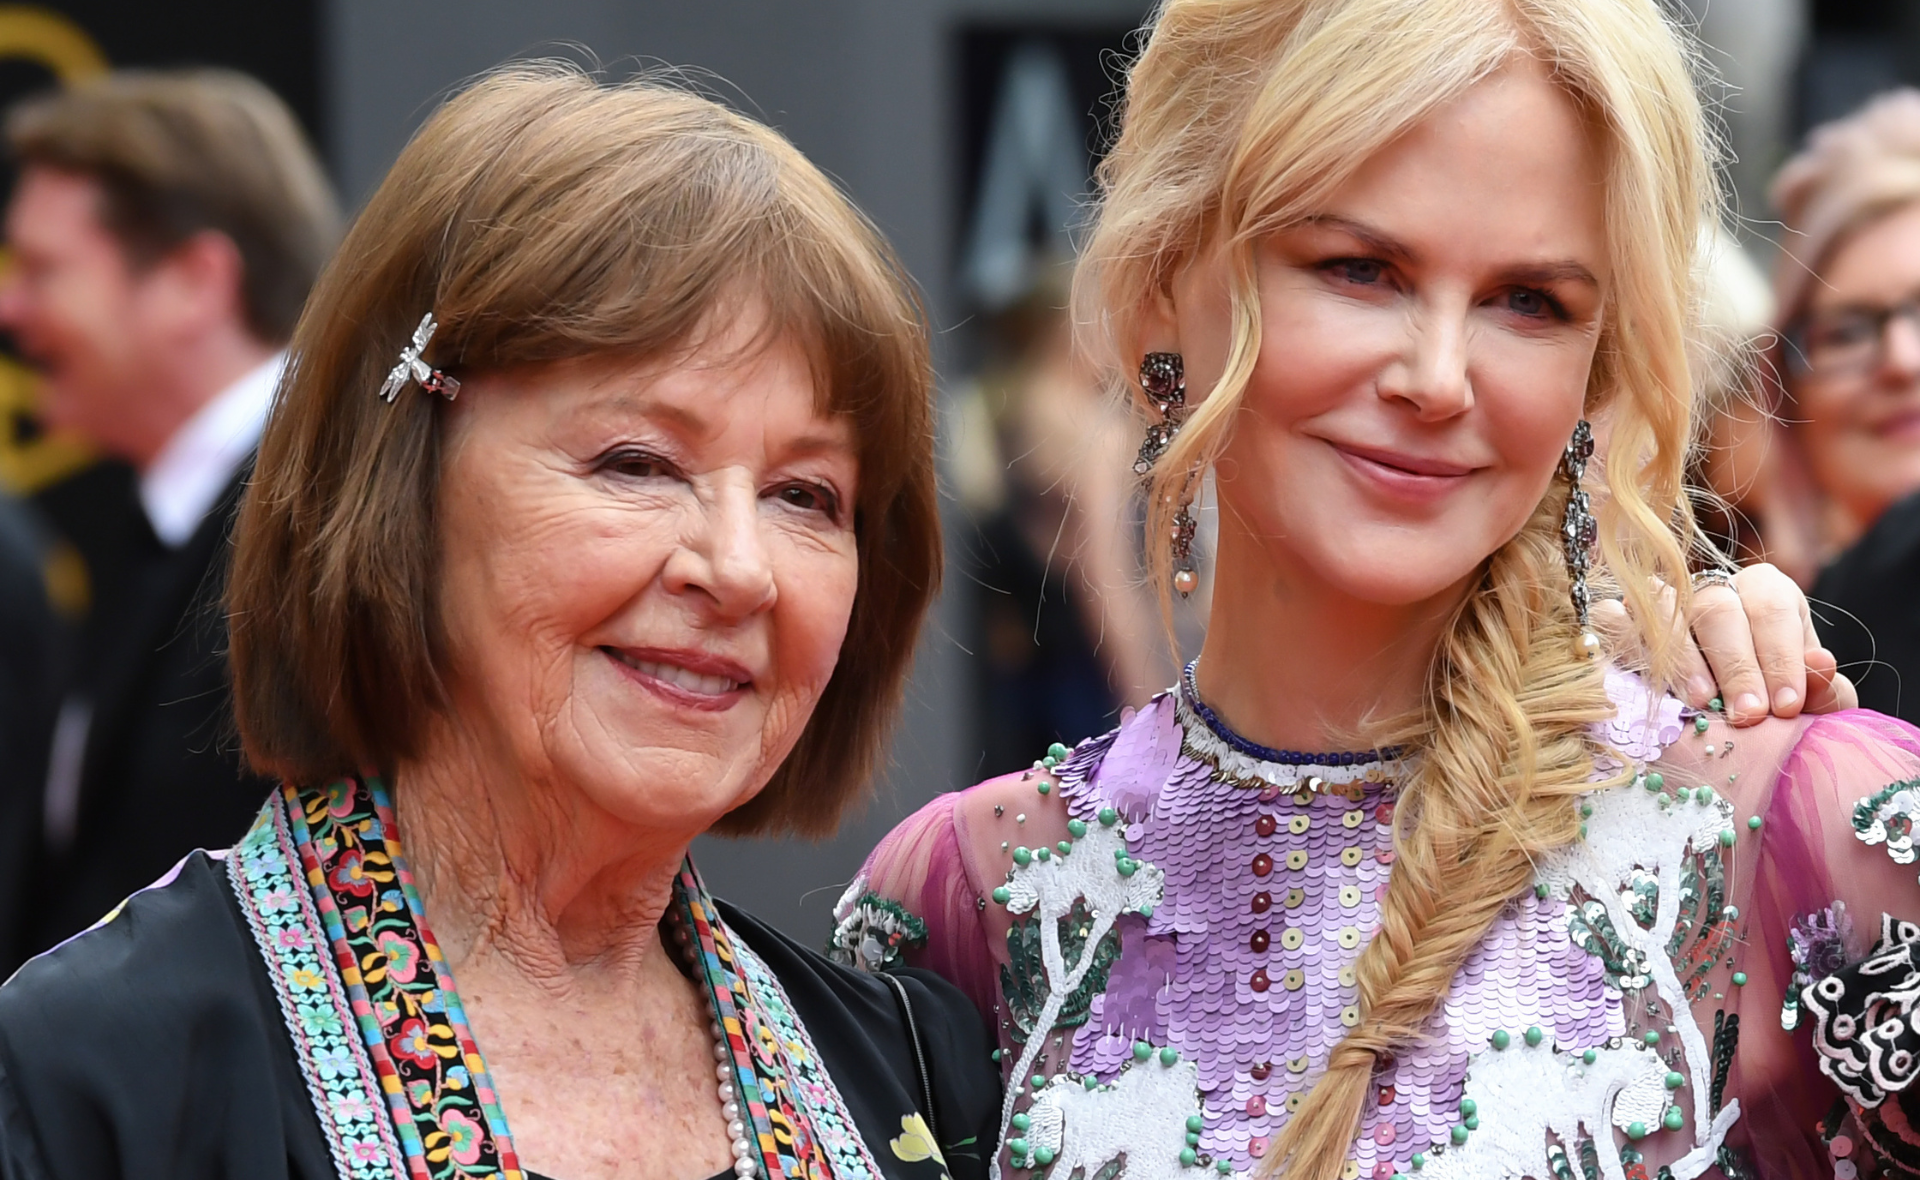 Nicole Kidman reunites with her mother in Australia following health scare